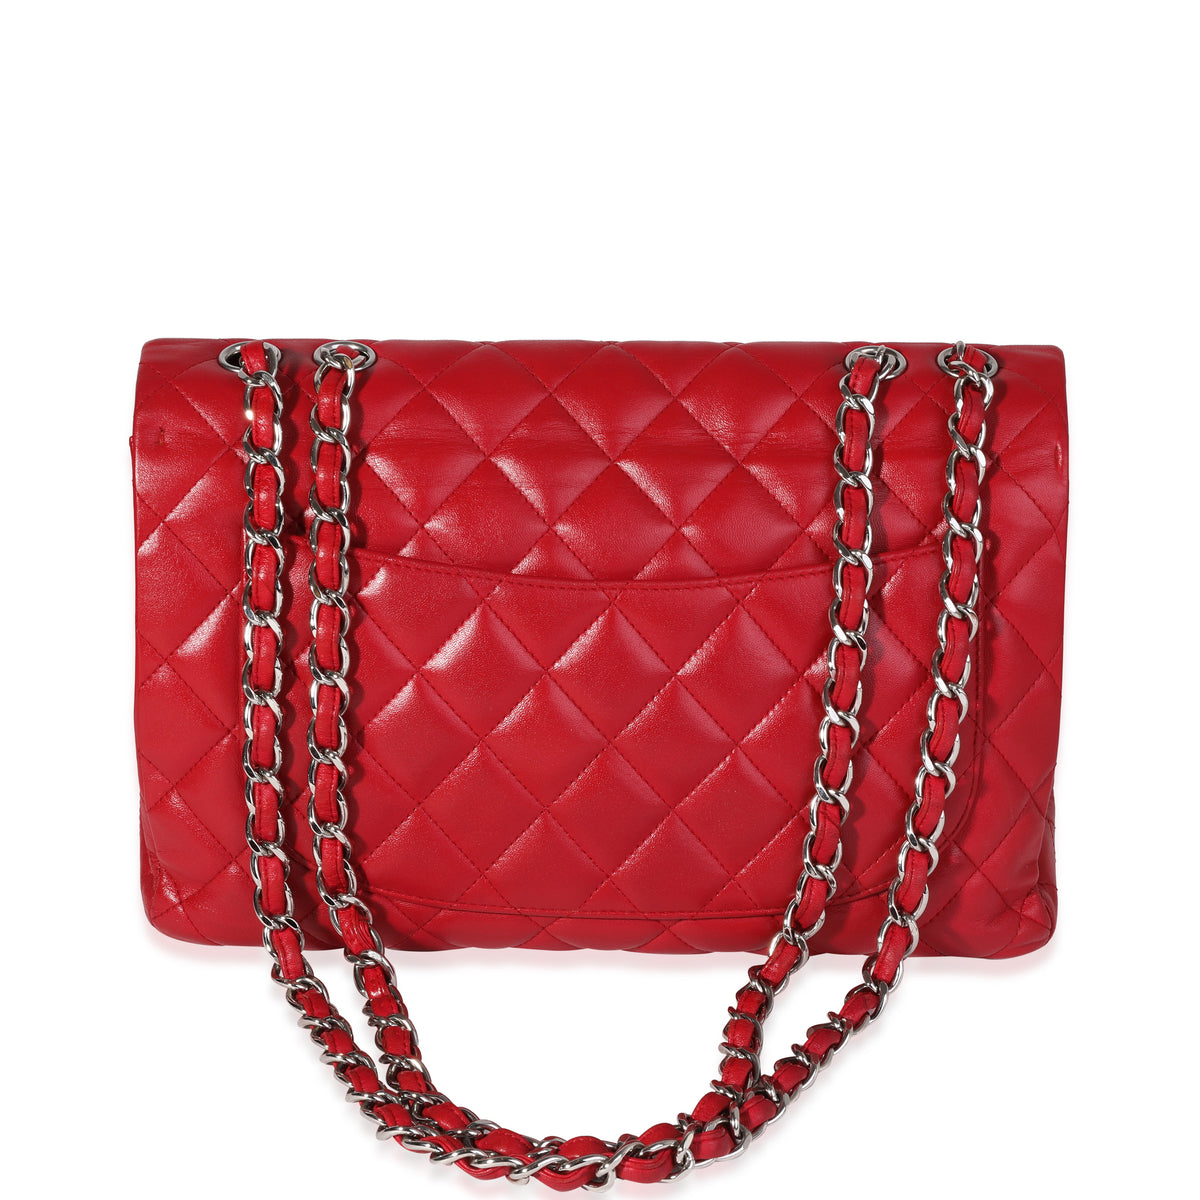 CHANEL Lambskin Quilted Mini Graphic Flap Bag Red Black White 763289   FASHIONPHILE